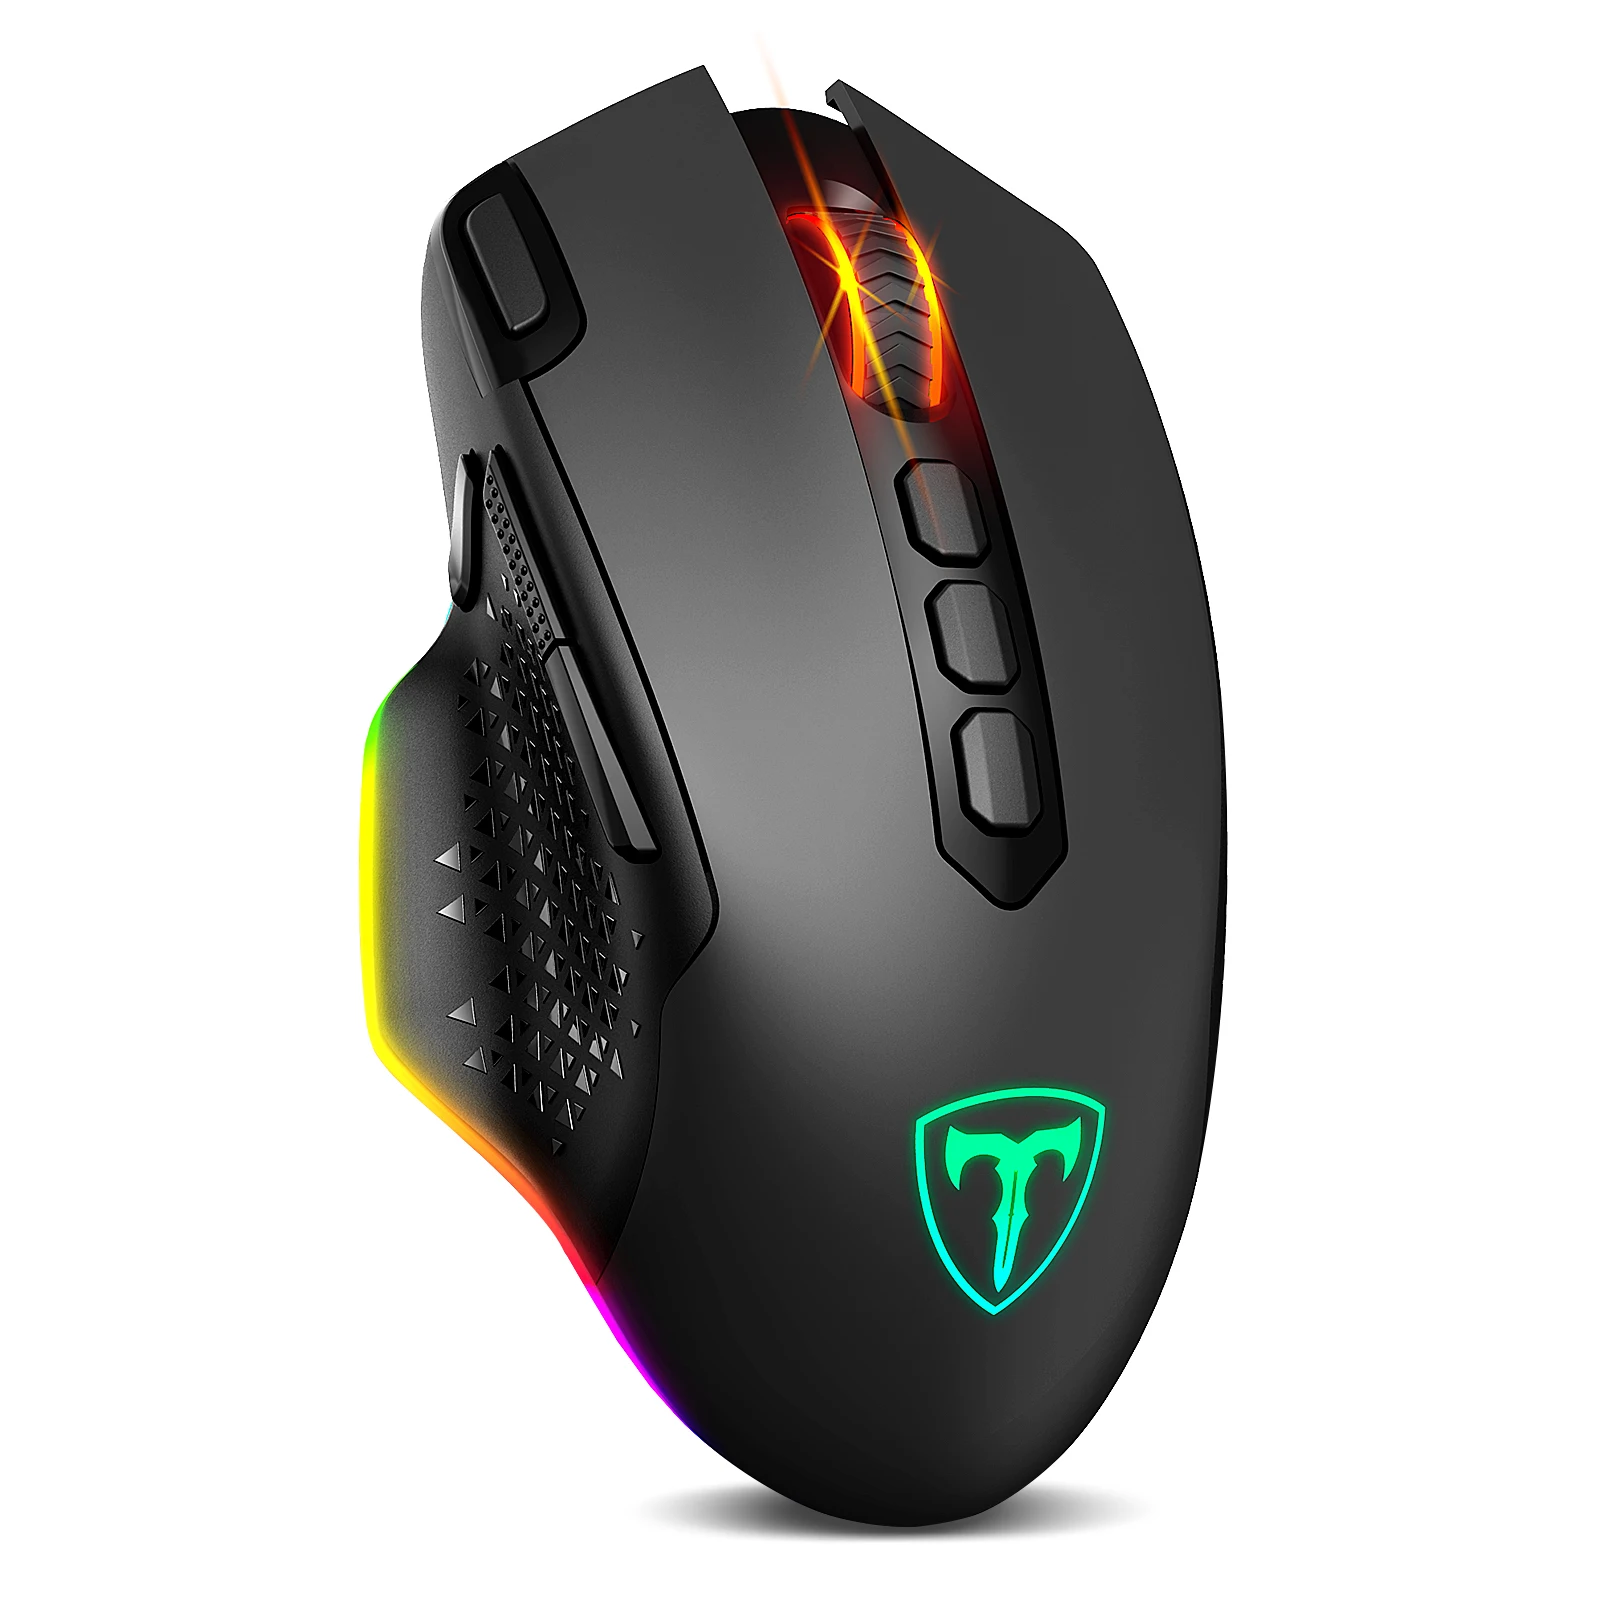 VicTsing PC282 10000 DPI Wireless Gaming Mouse Rechargeable Ergonomic Mice with 10 Programmable Buttons RGB Backlit for PC Gamer wireless mouse with usb c